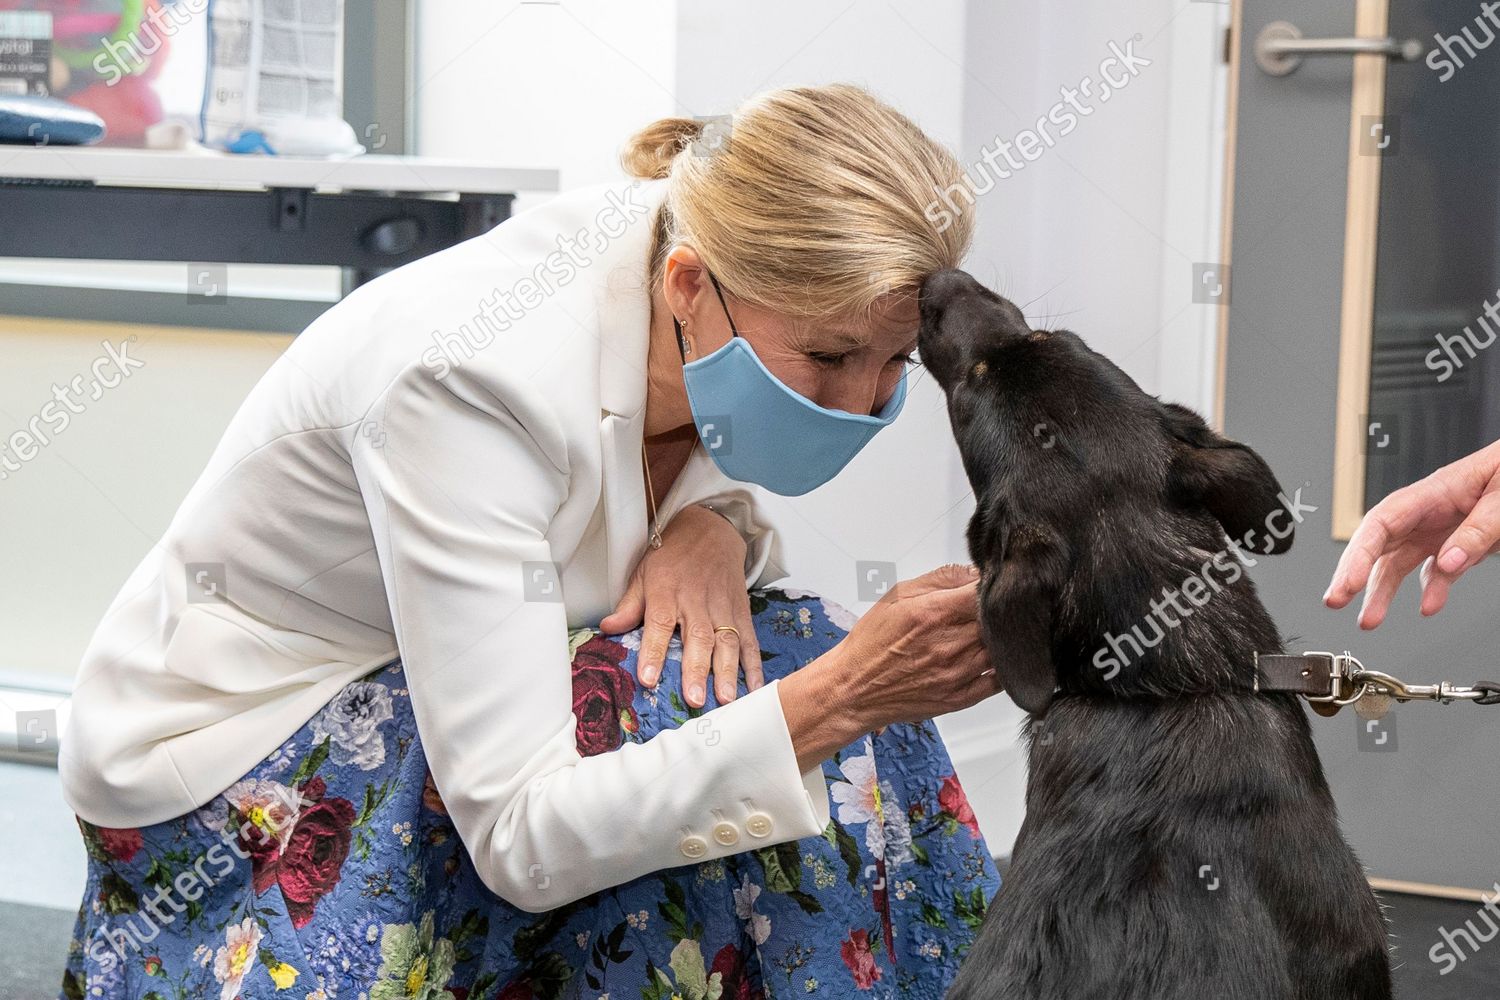 sophie-countess-of-wessex-and-princess-alexandra-visit-to-the-guide-dogs-for-the-blind-association-bristol-uk-shutterstock-editorial-12199244d.jpg